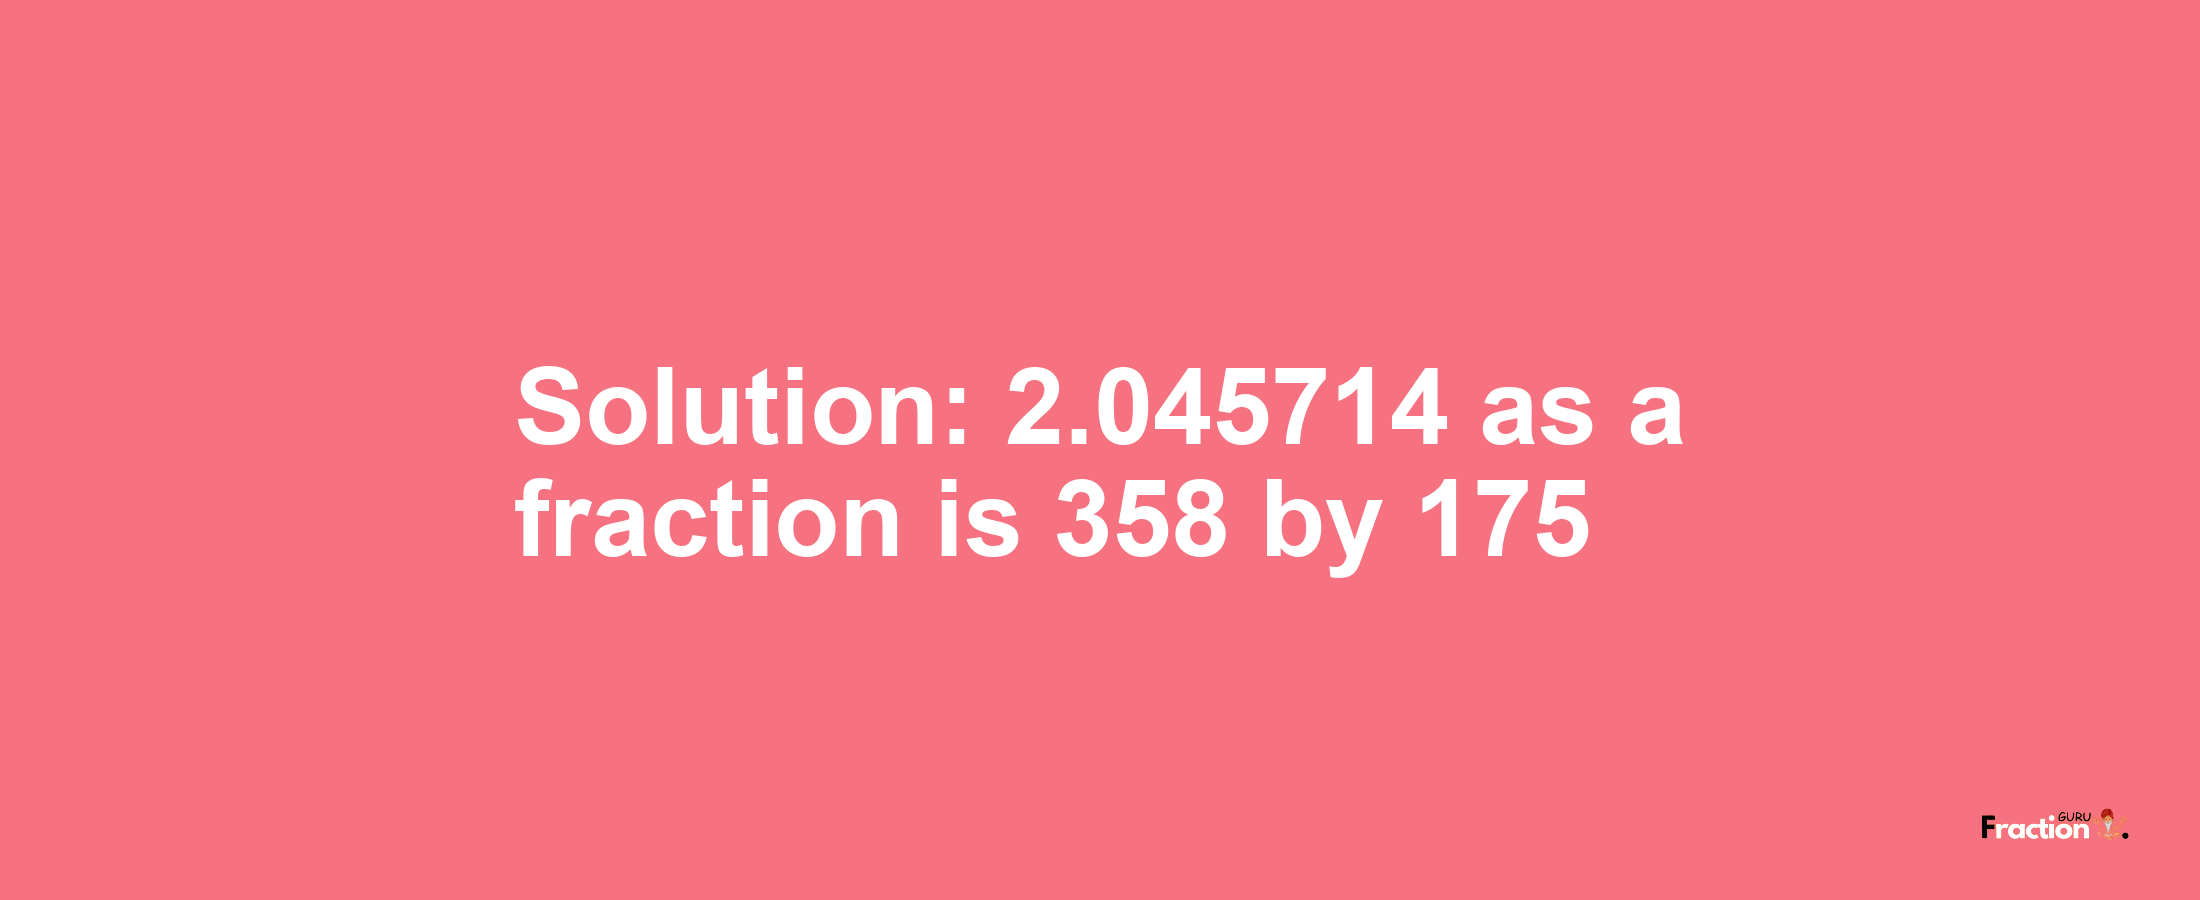 Solution:2.045714 as a fraction is 358/175